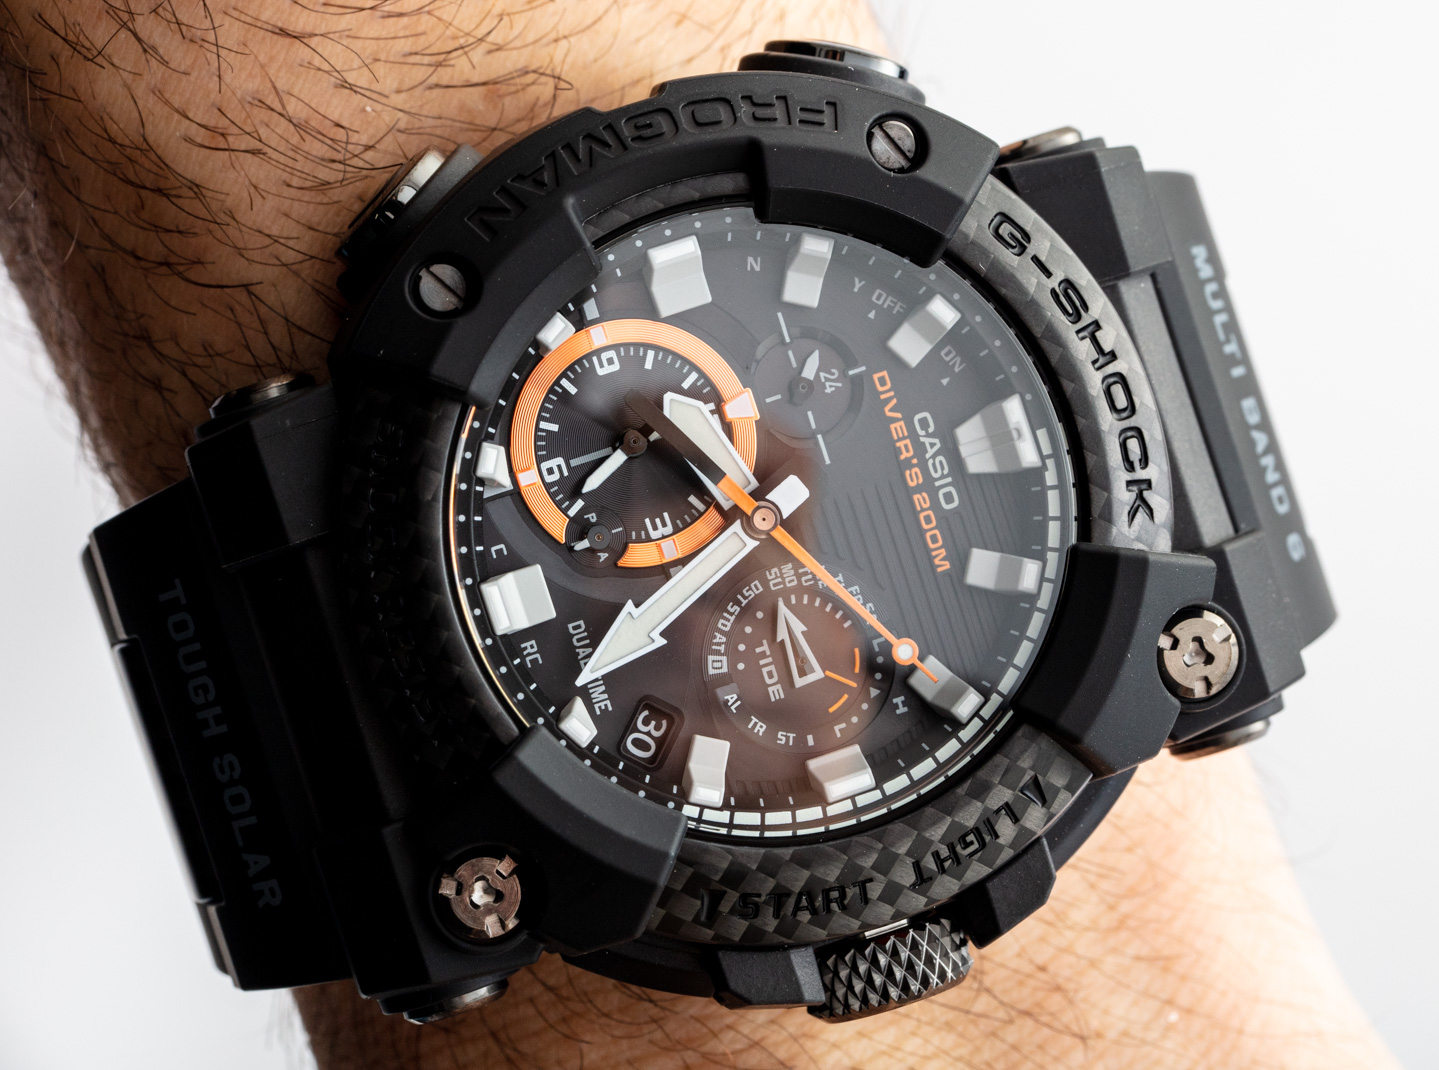 Hands-On: Casio G-Shock Frogman GWF-A1000XC-1A Watch With New Case 